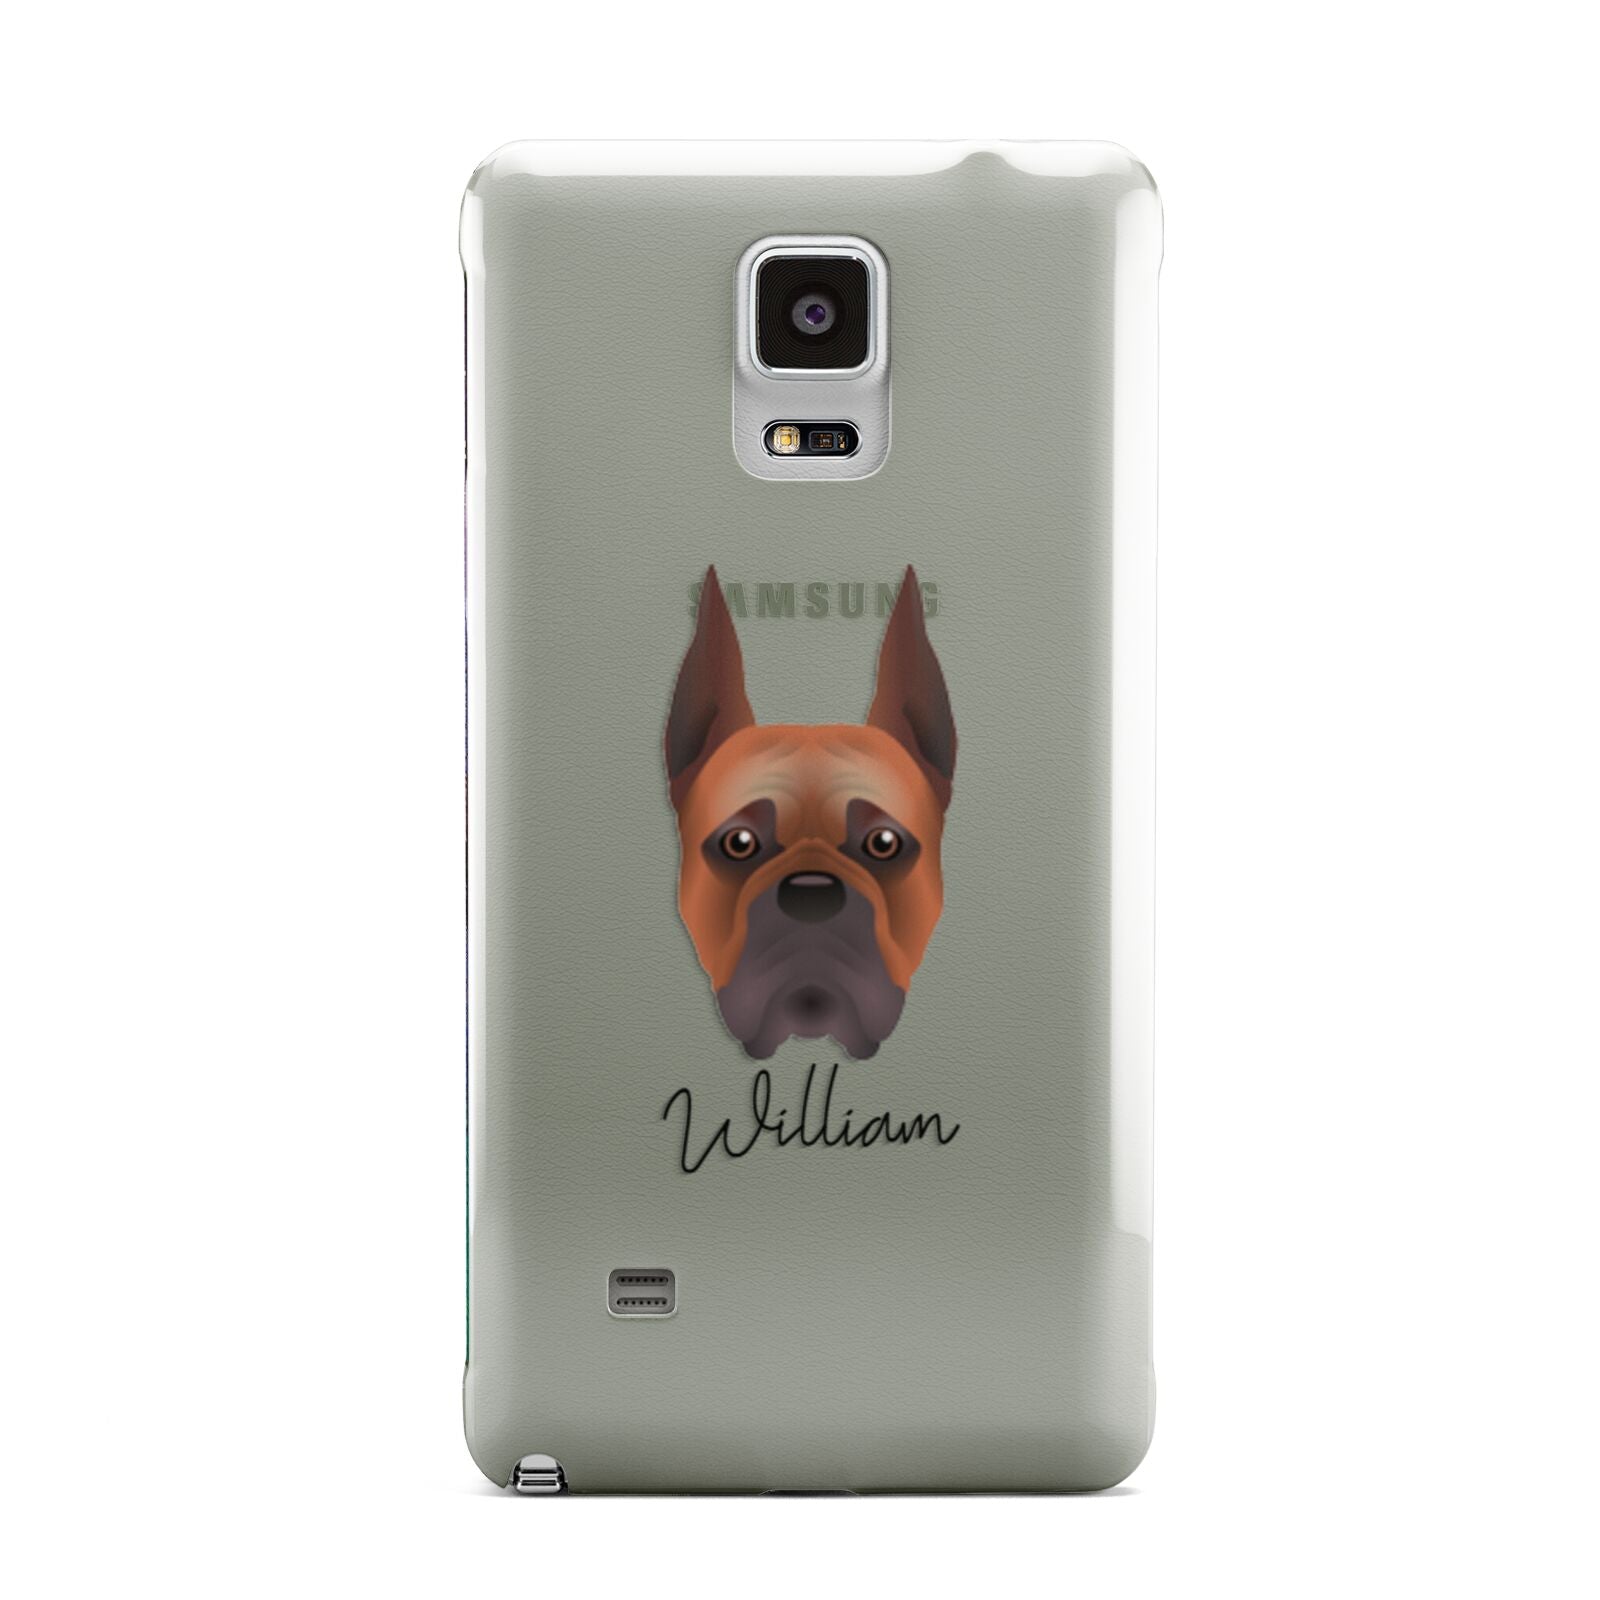 Boxer Personalised Samsung Galaxy Note 4 Case